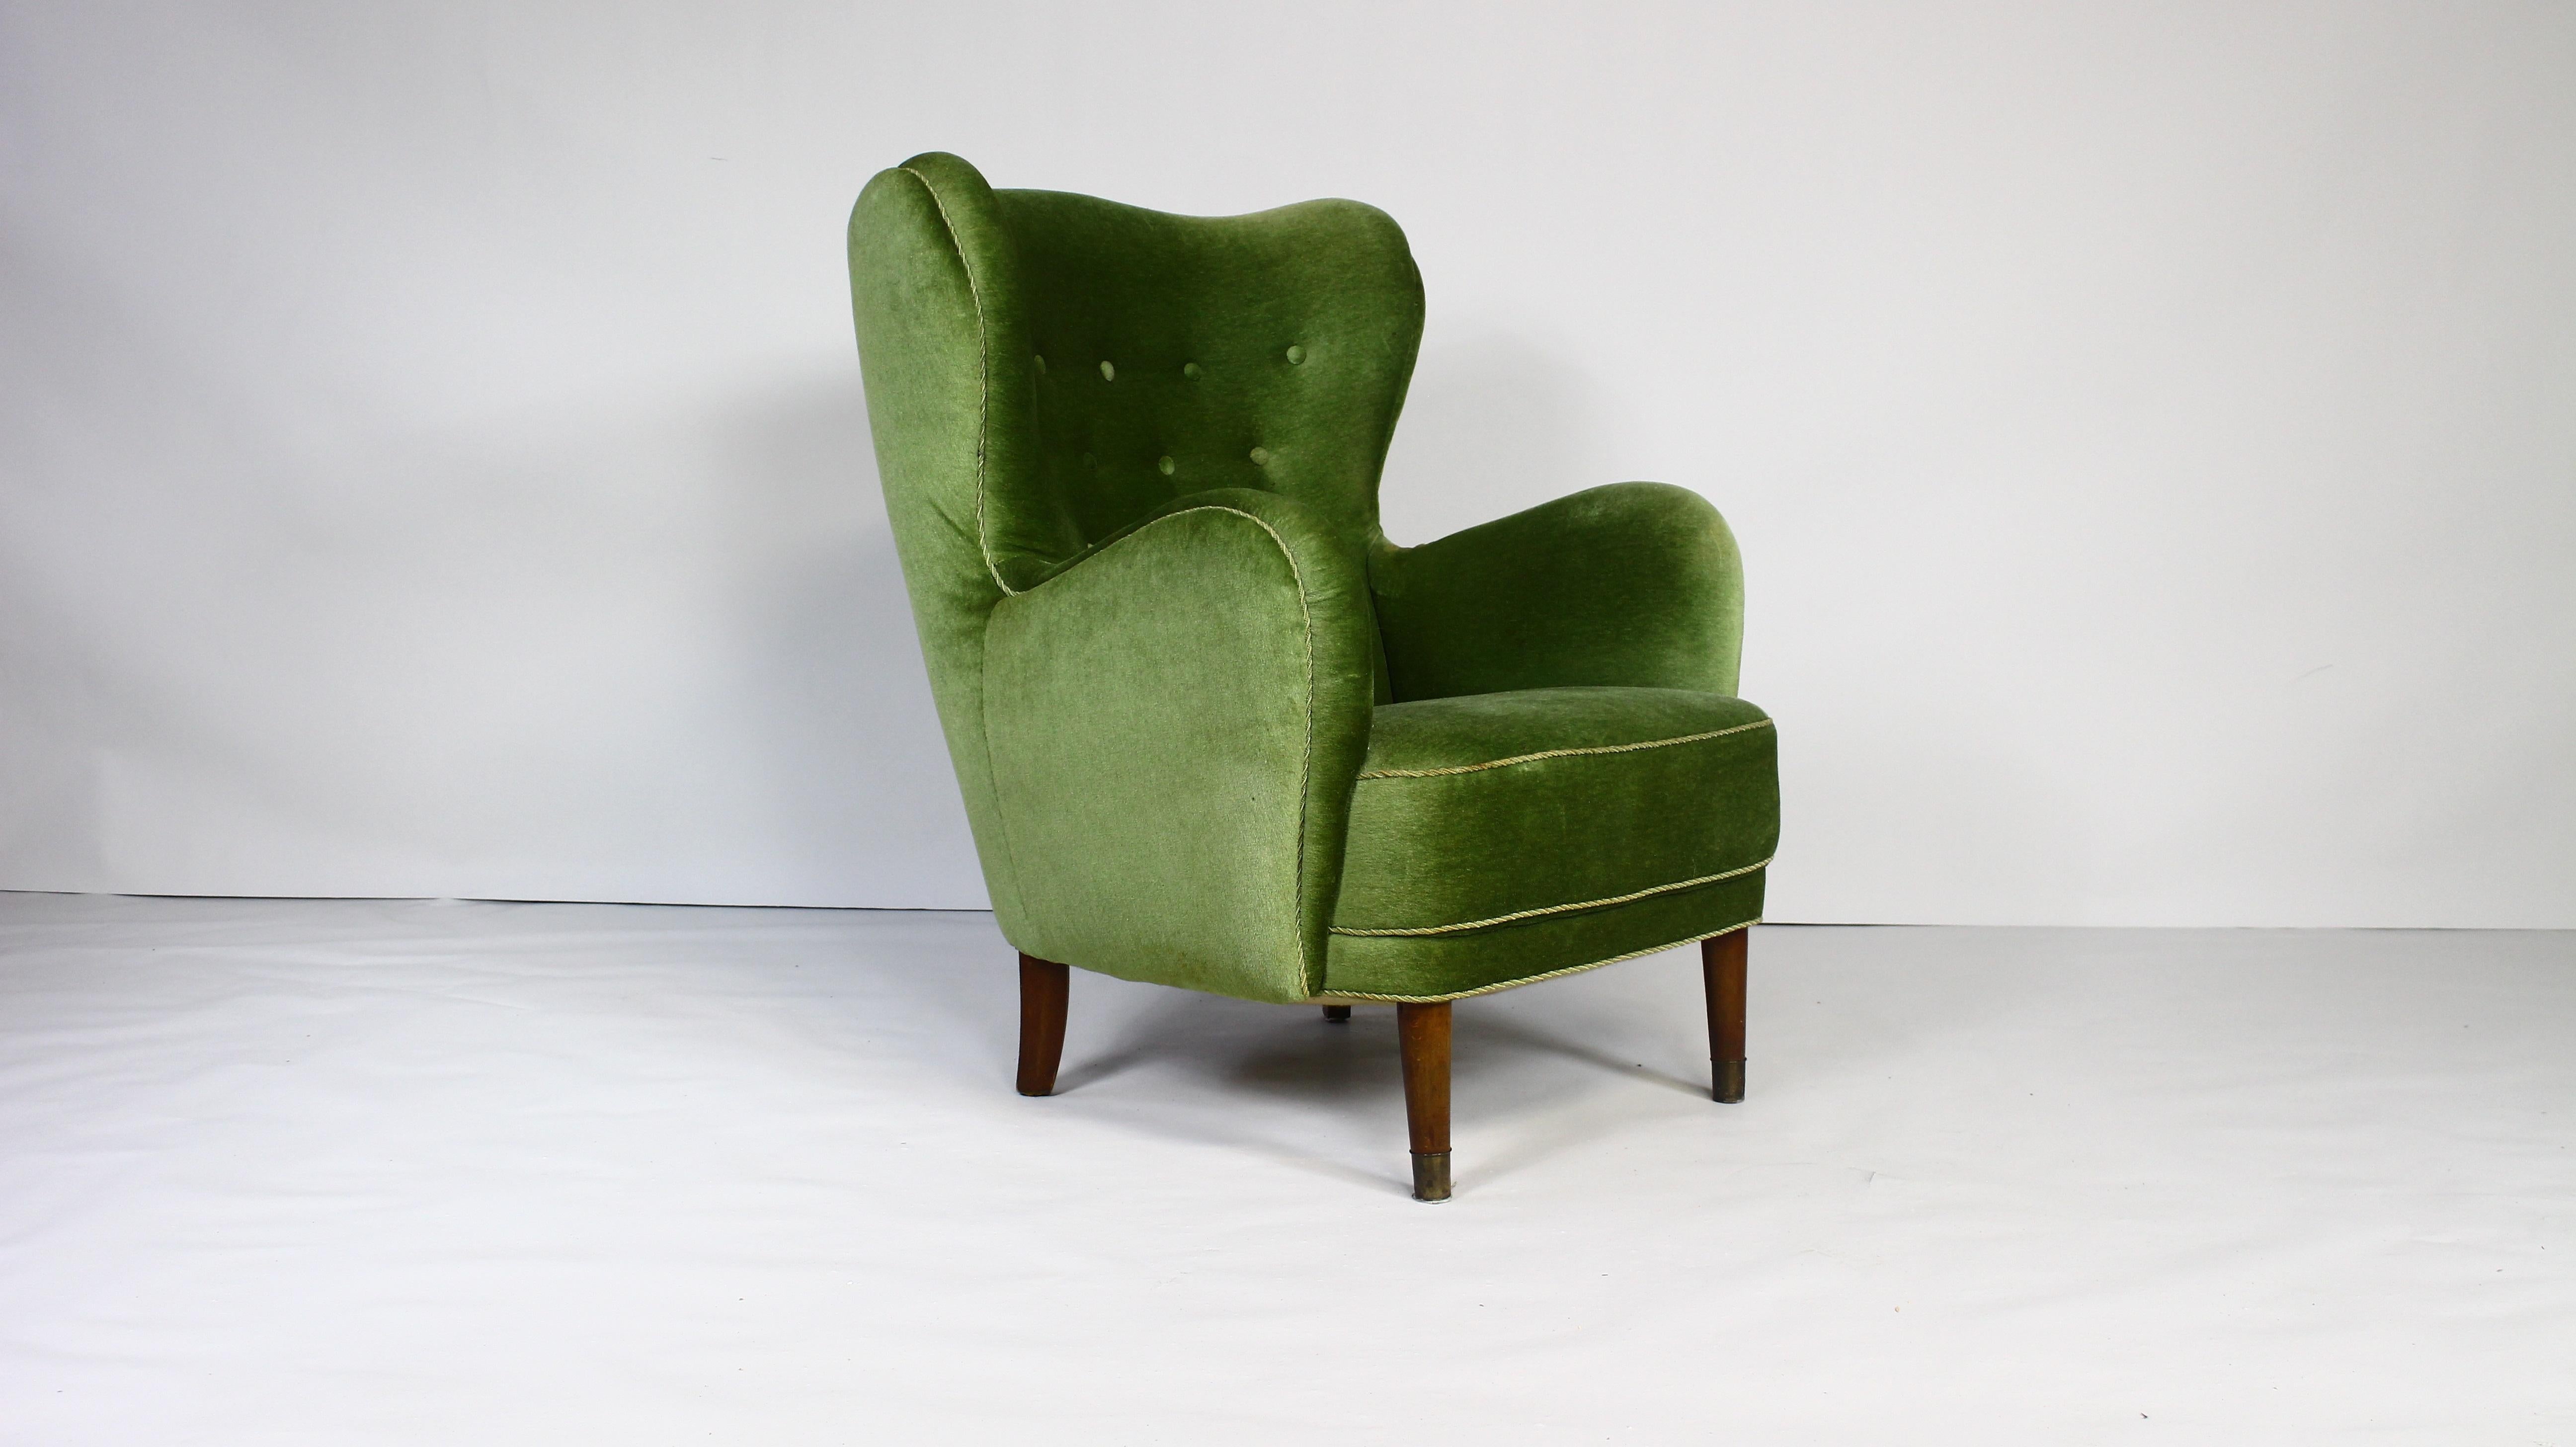 Lounge chair, stained beech, green velvet, Denmark, 1950s.

This archetypical wingback chair of the 1950s is both extremely comfortable and pleasing to the eyes.
 This easy chair with stained beech legs features a modest wing and buttoned back.